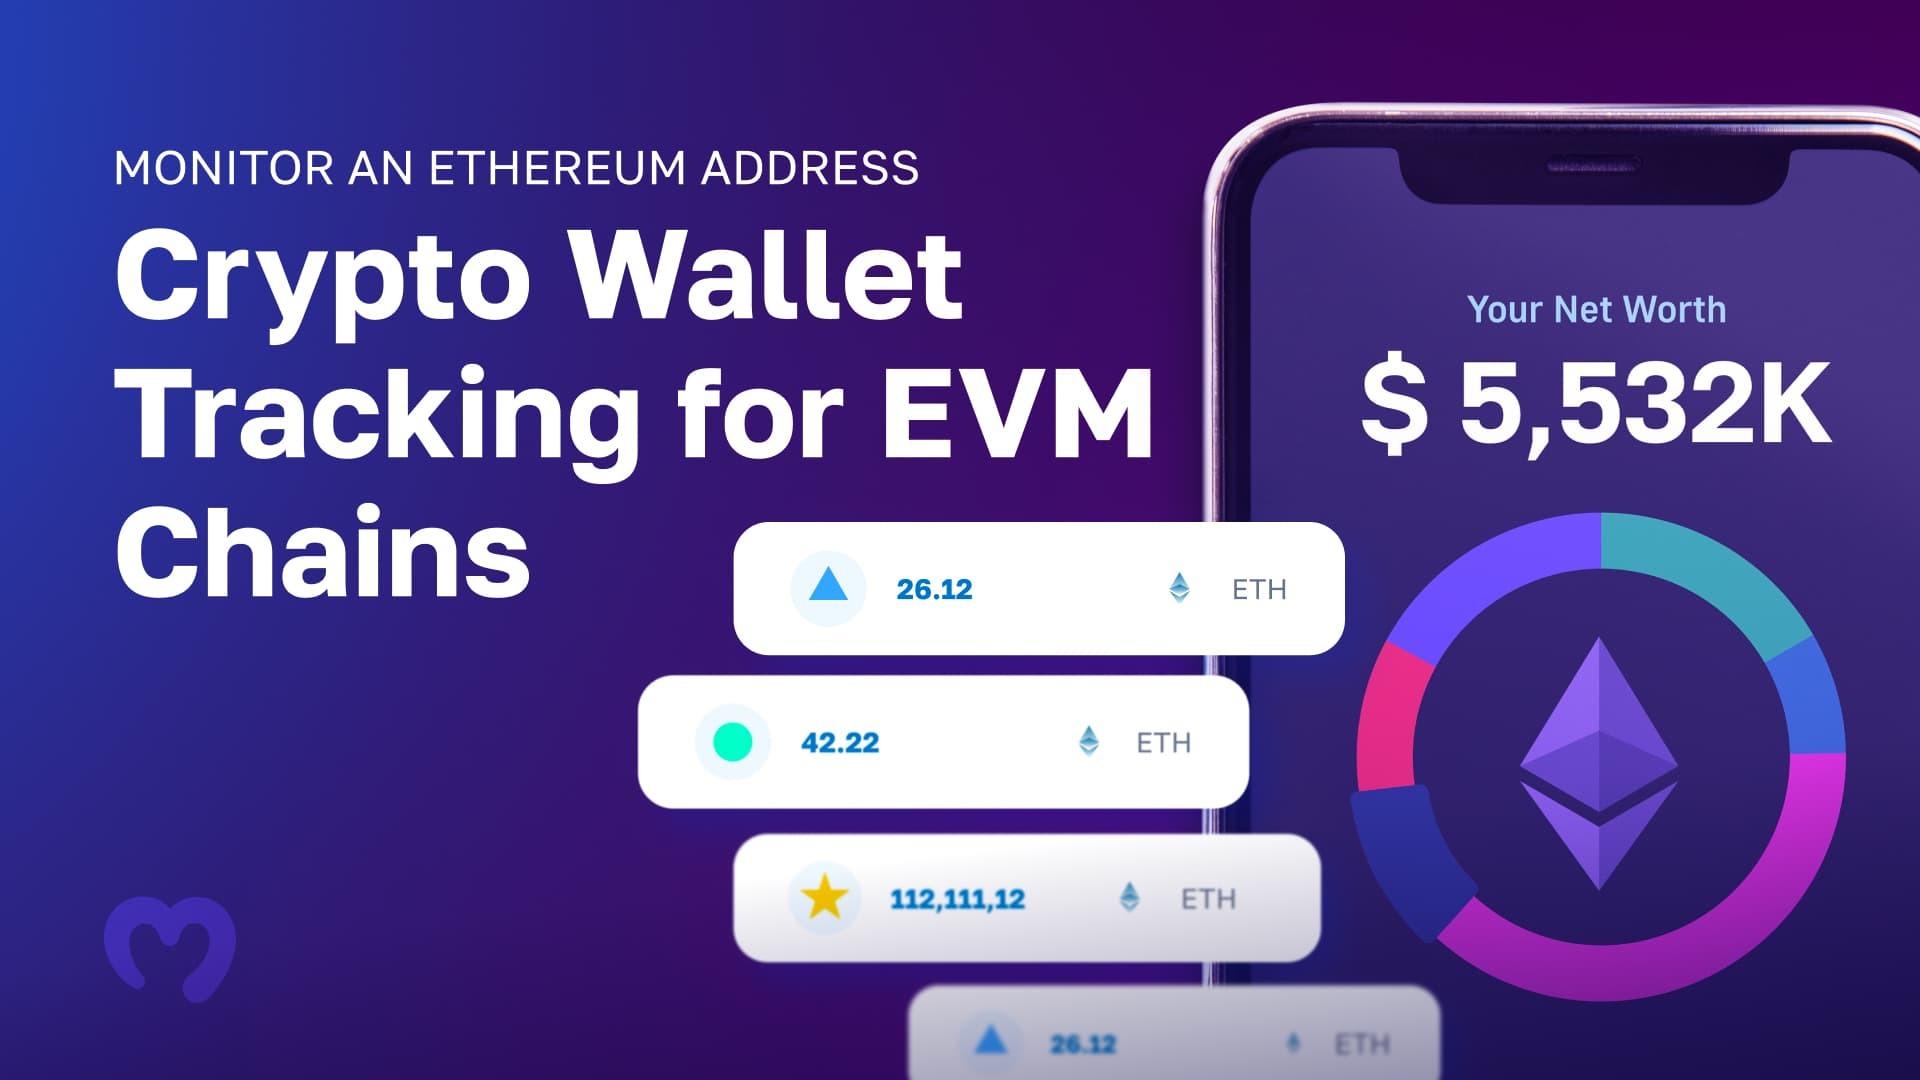 Monitor an Ethereum Address - Crypto Wallet Tracking for EVM Chains